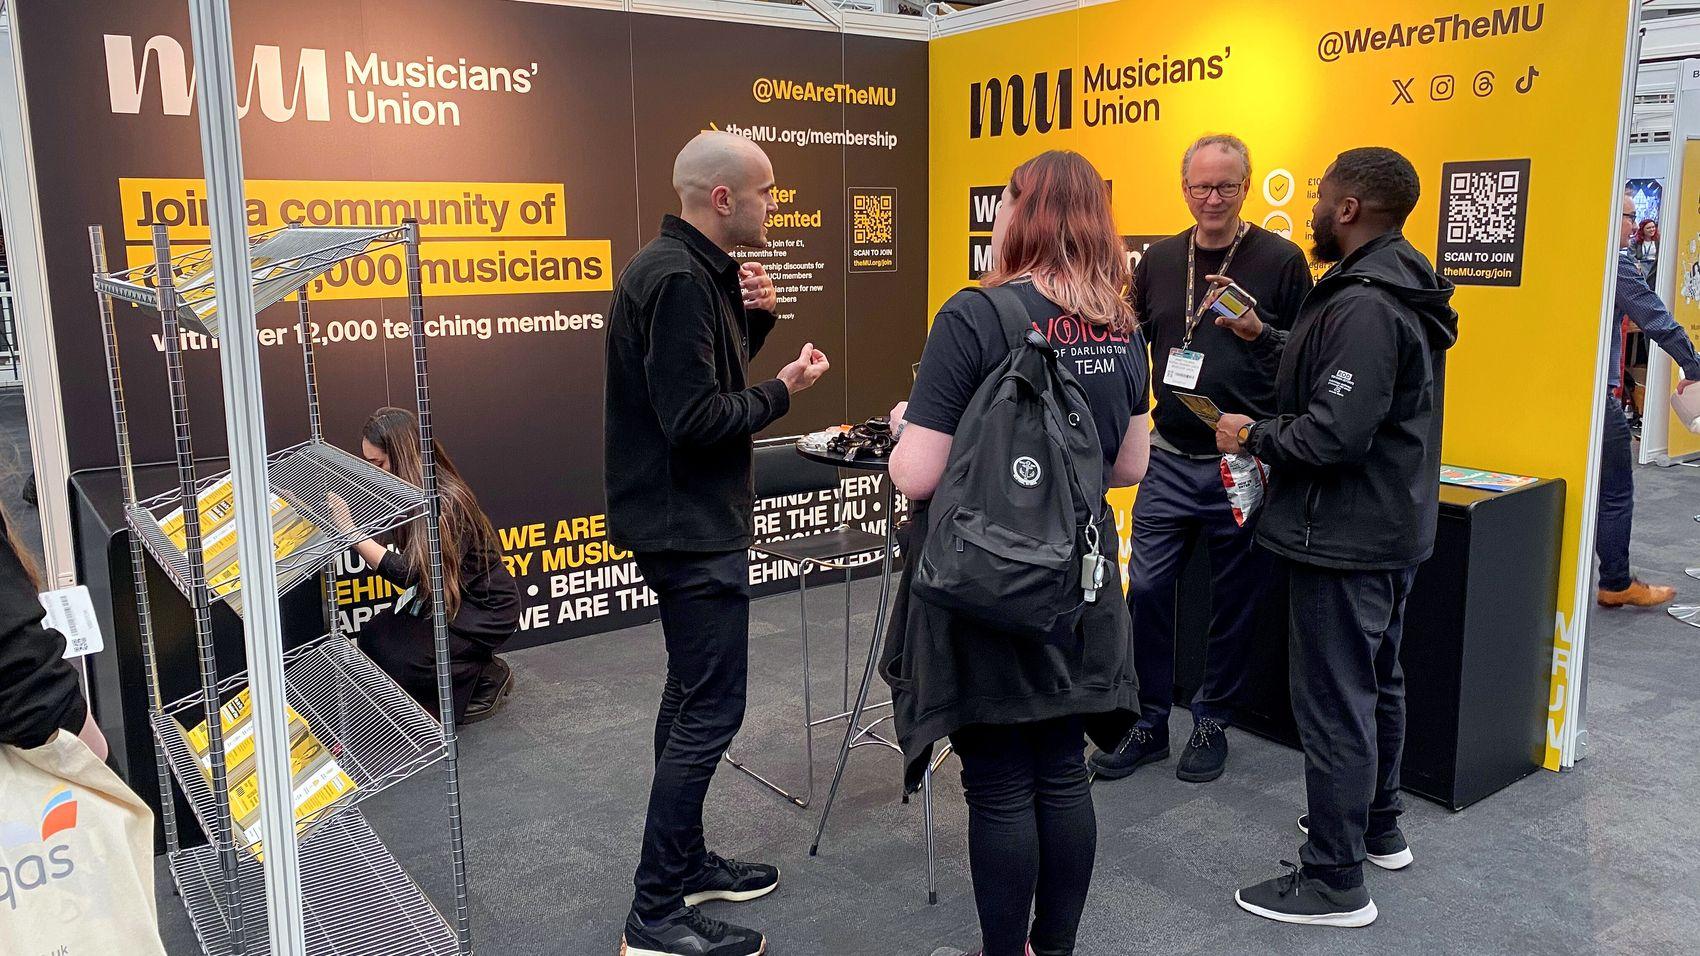 The MU at a exhibition with a stand.